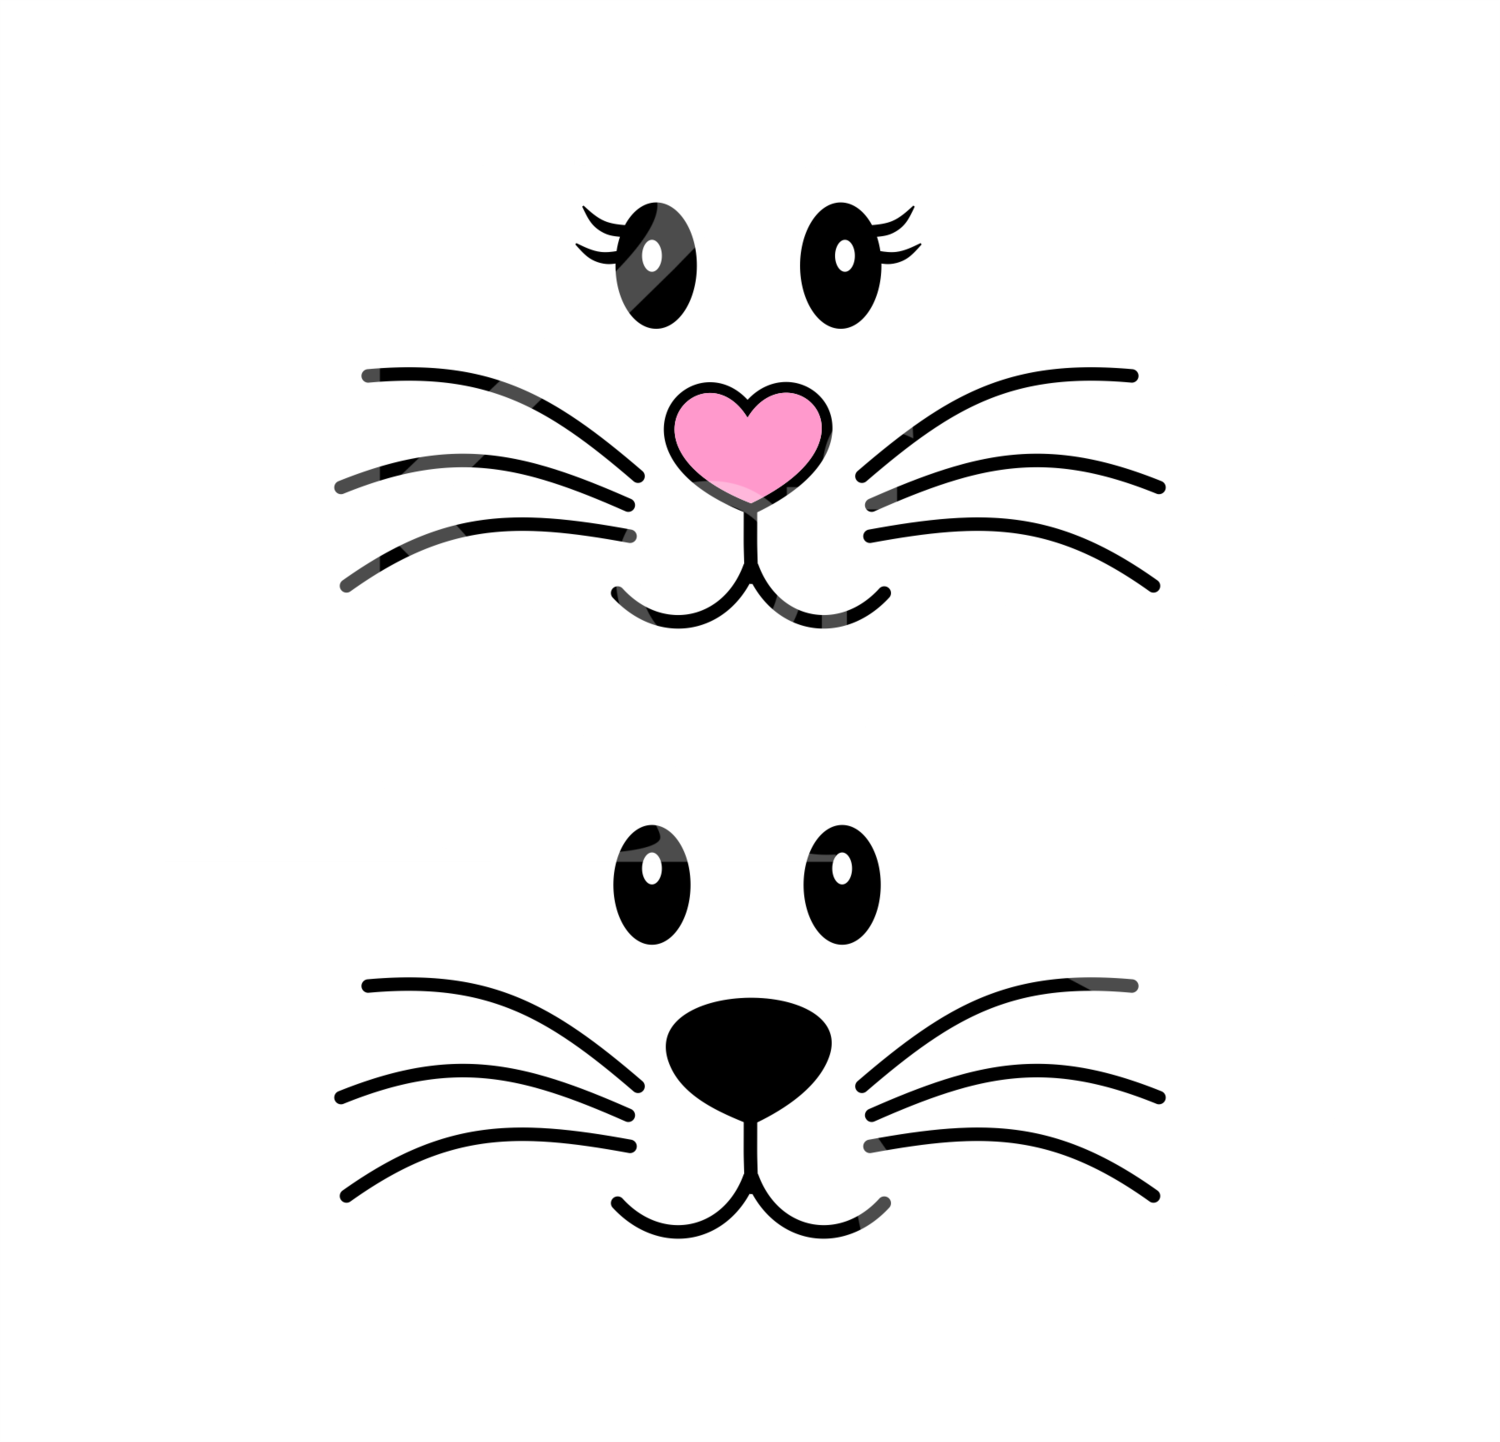 Easter Bunnies SVG, Love Bunnies SVG, His/Her Bunnies SVG, Png, EPS